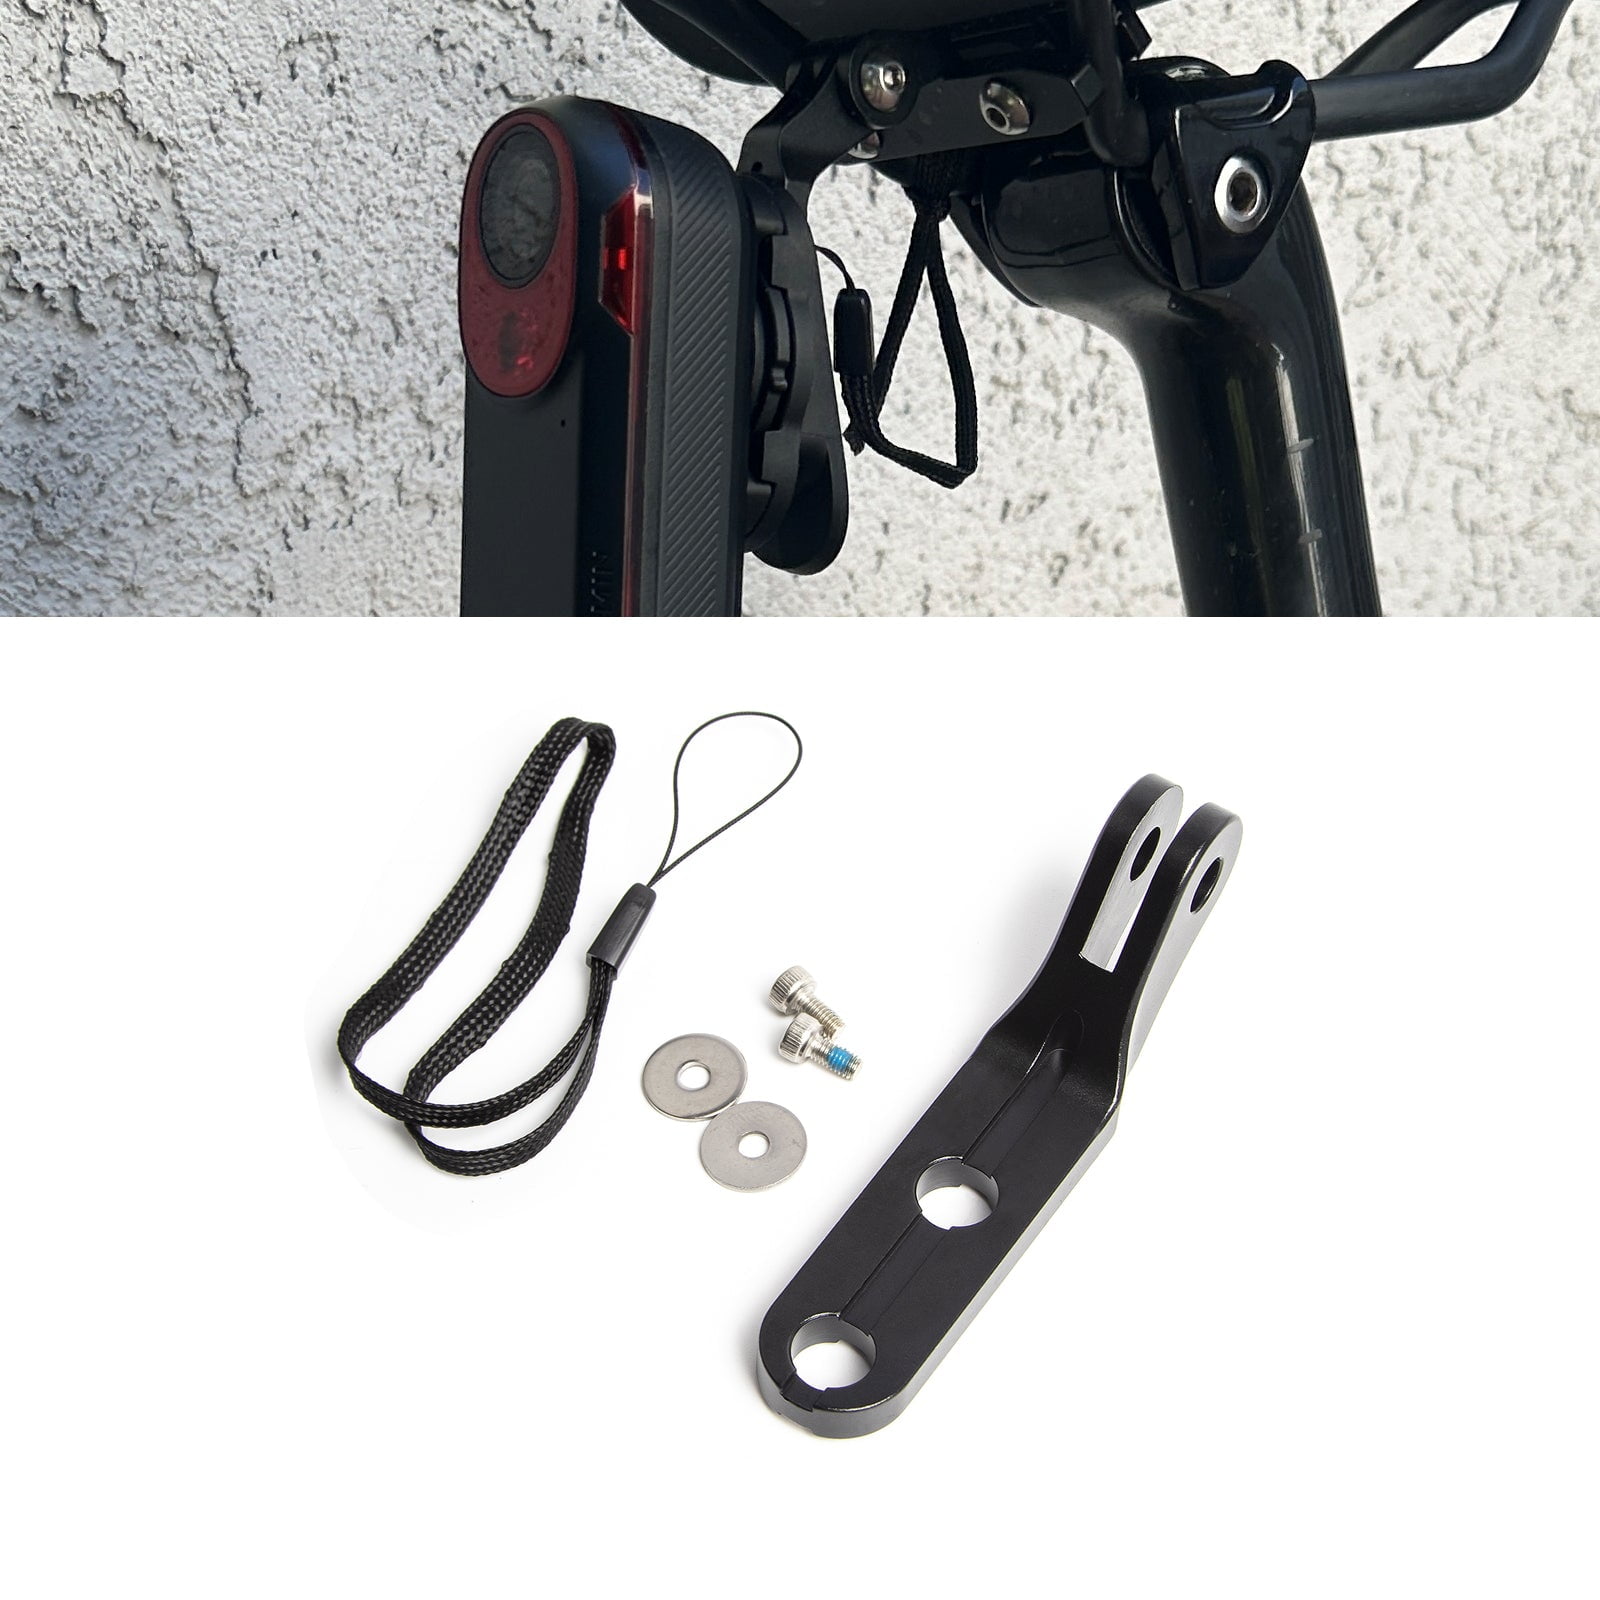 Xotic Tech Adapter Mount Only, Compatible with Garmin Varia RCT715 Tail Light - Type A - Walmart.com